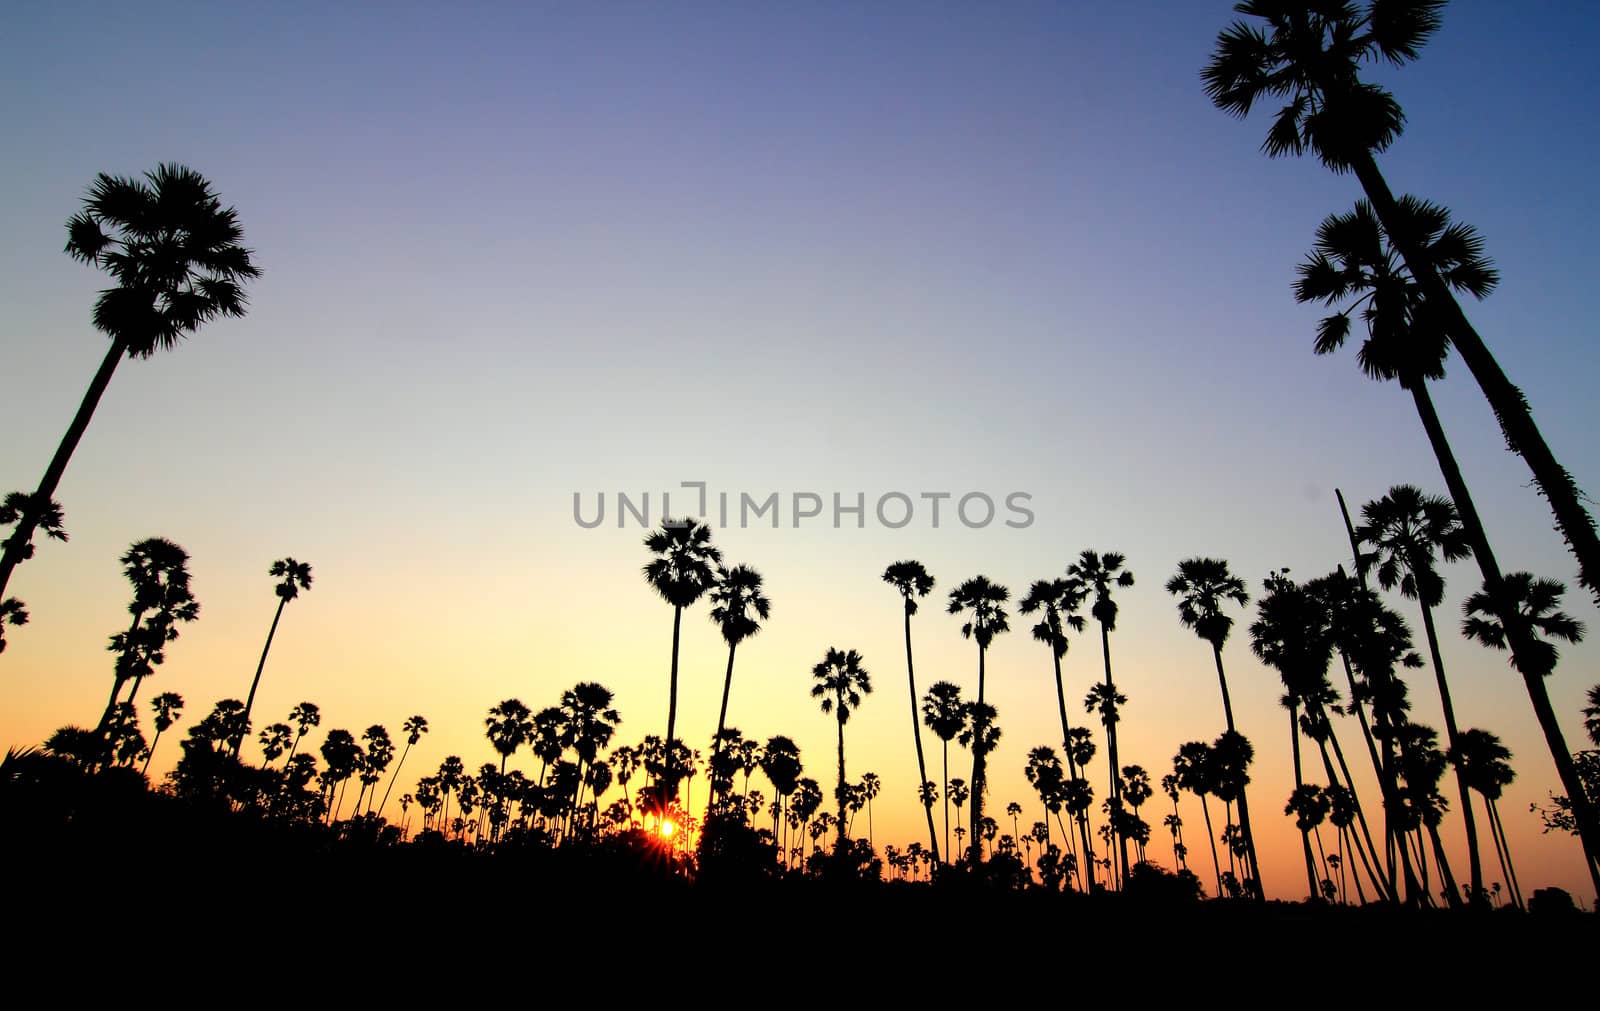 Silhouette palm trees at sunset